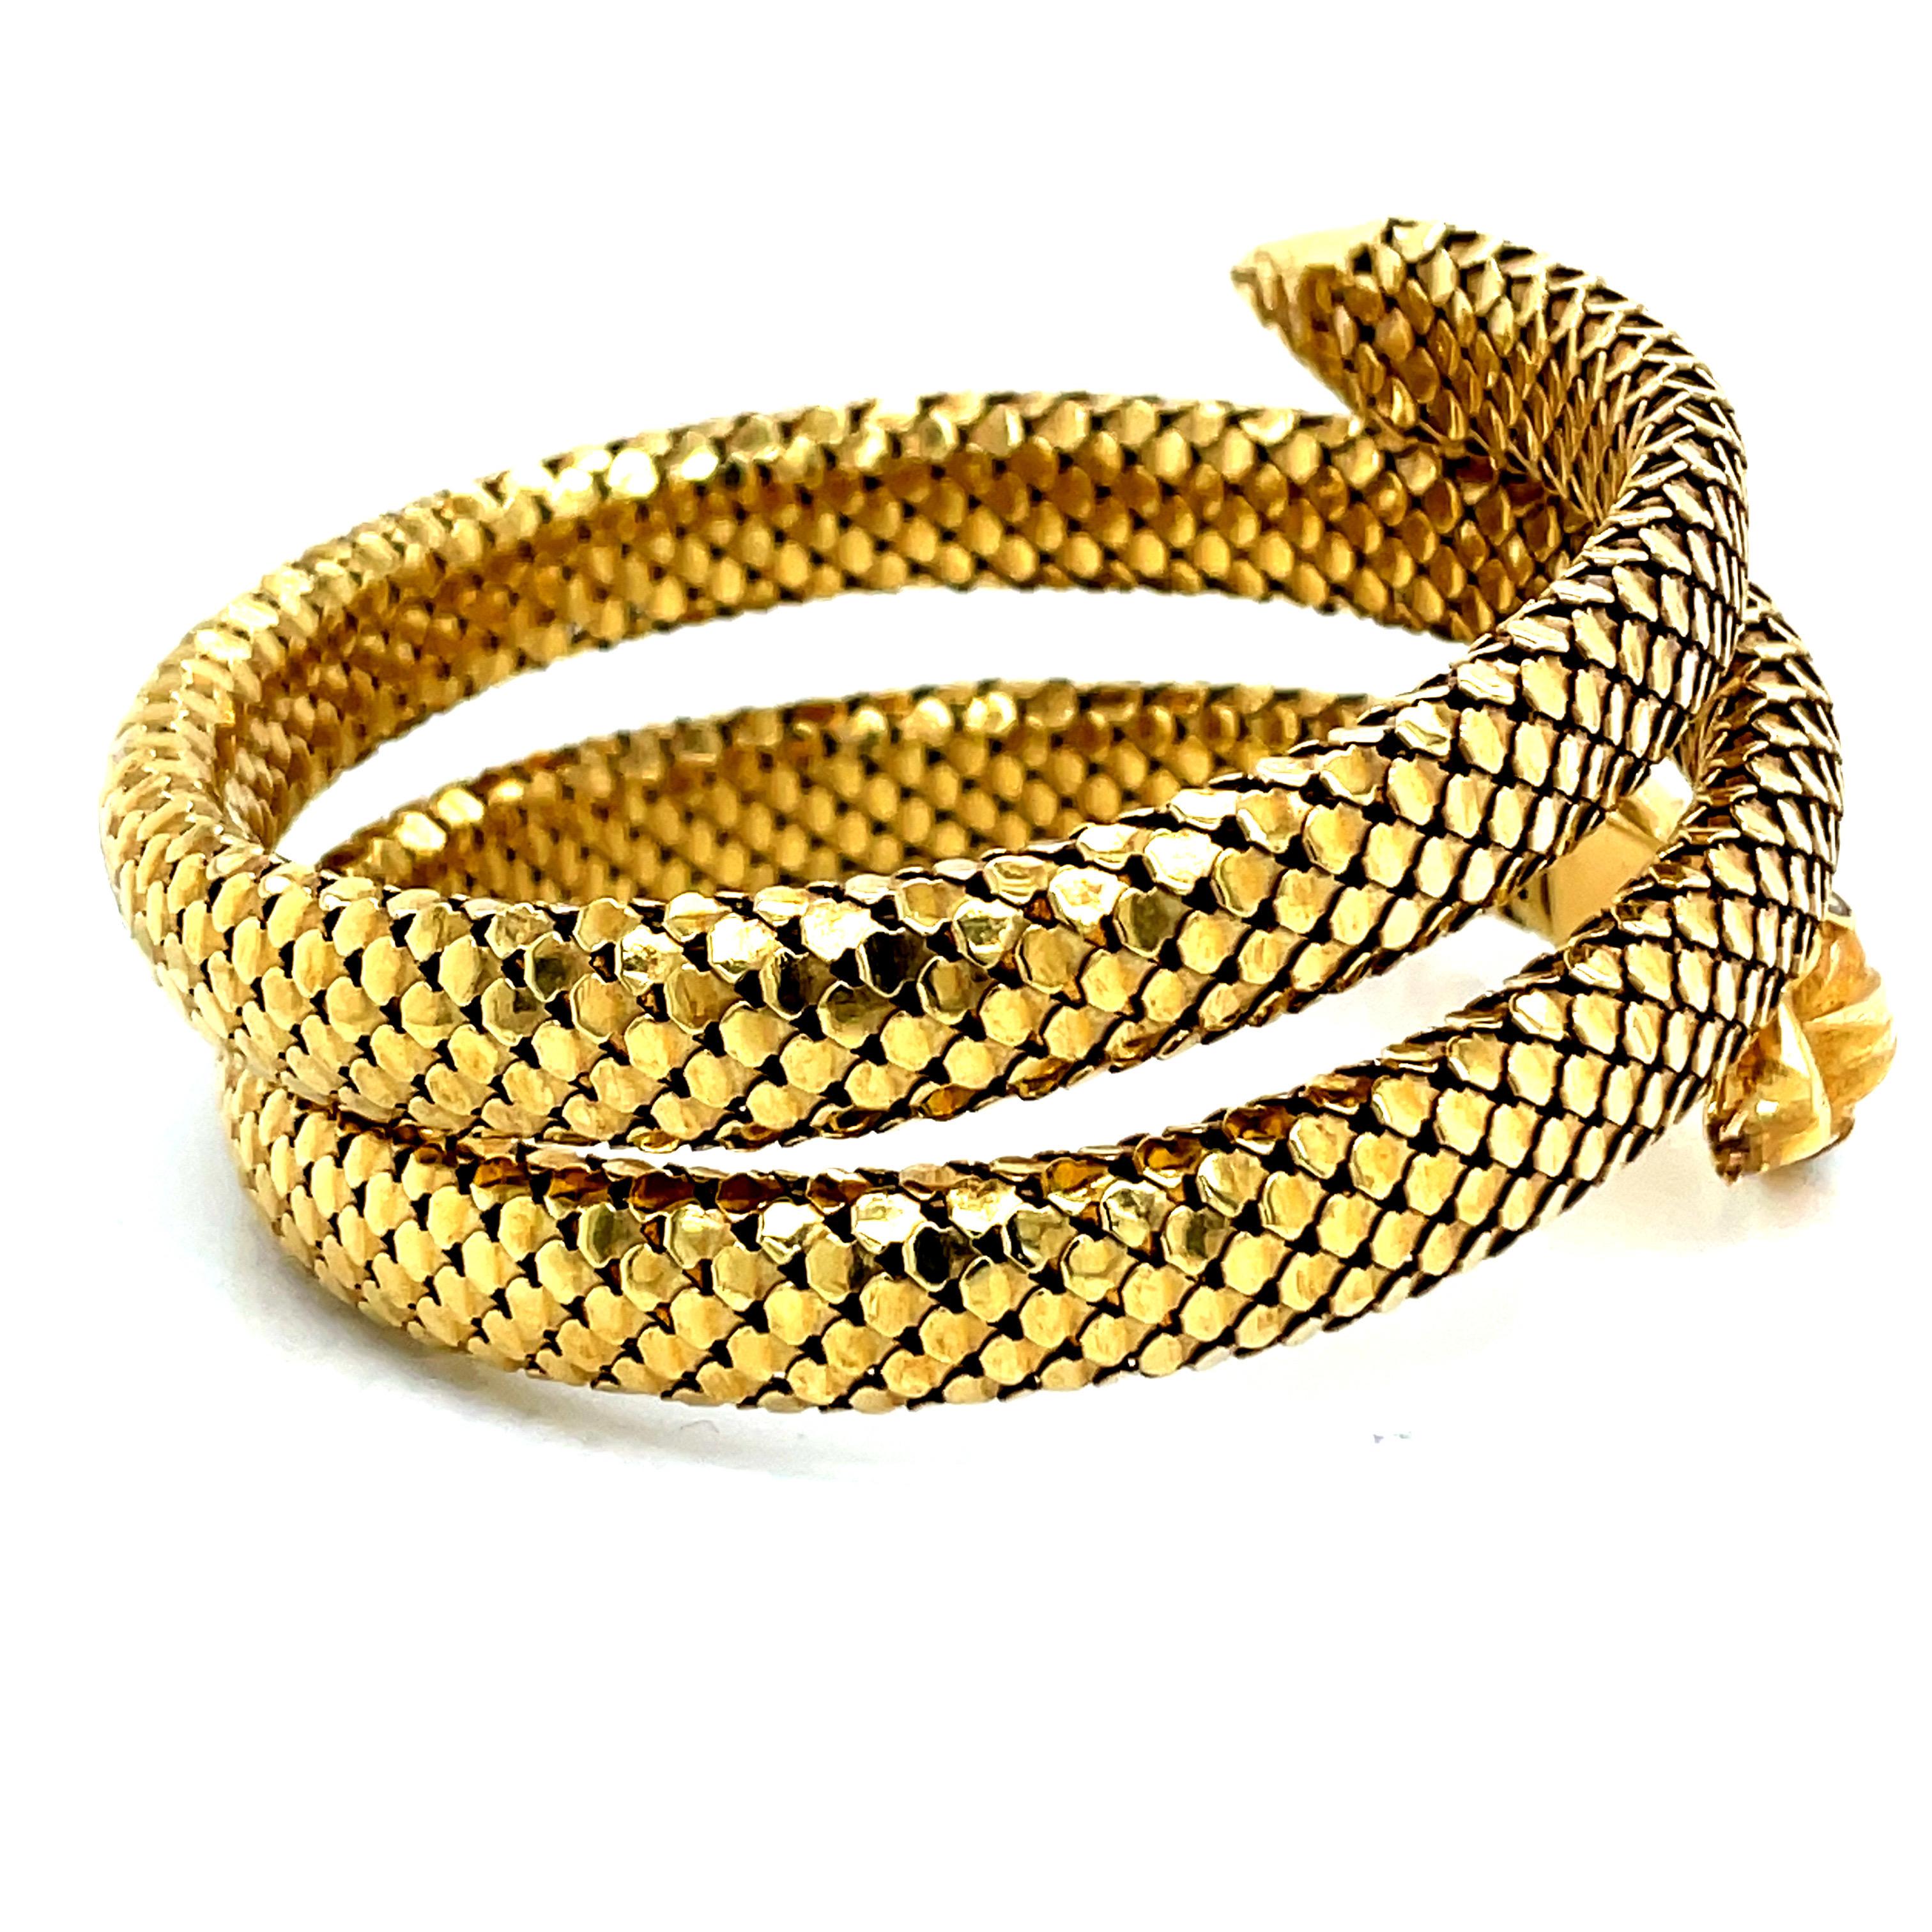 Vintage 1980s 18k Yellow Gold Snake Bracelet and Arm Band For Sale 3